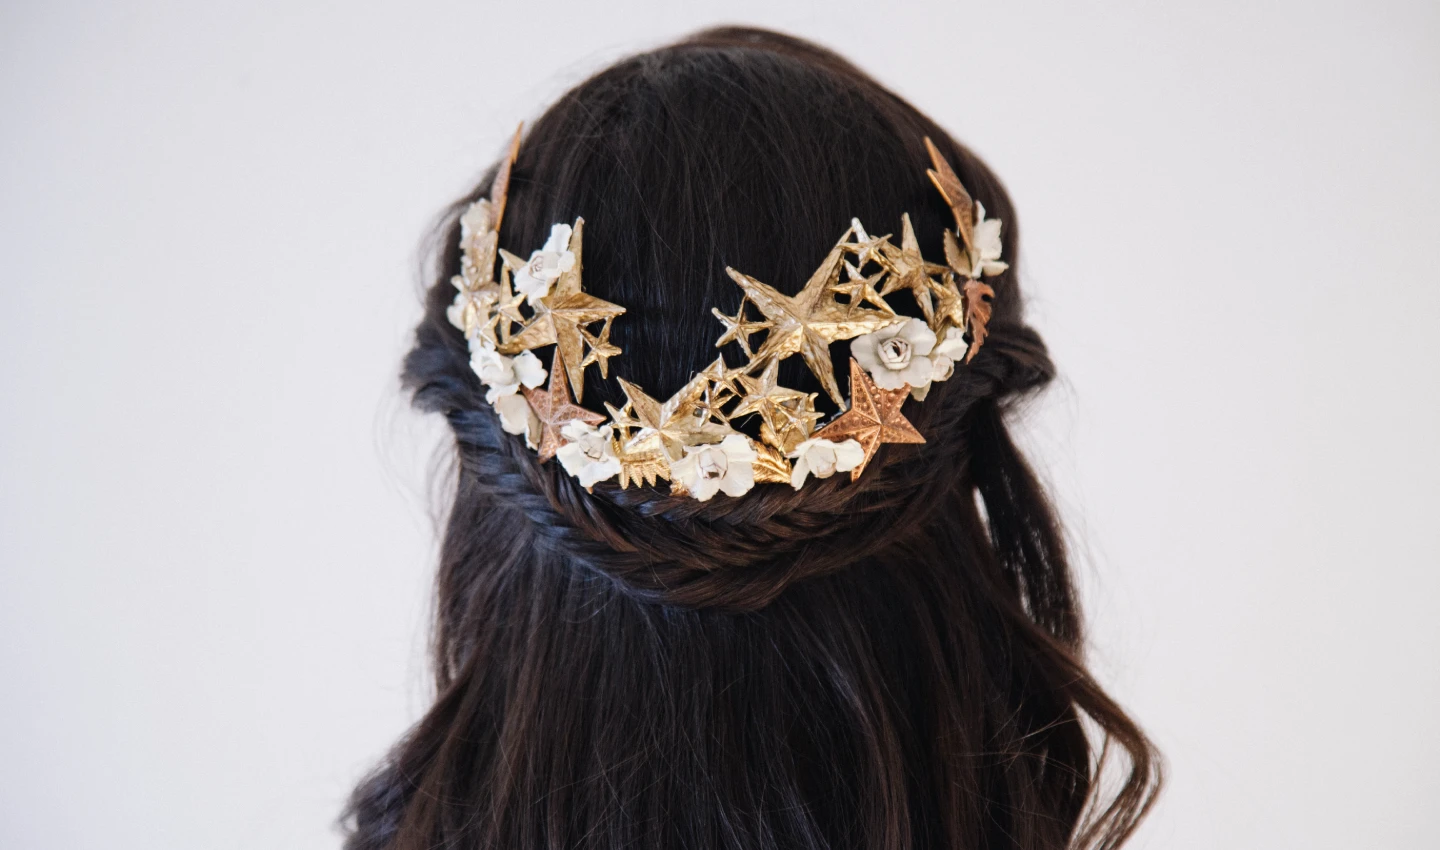 "A woman's hair styled with glamorous hair accessories, including sparkling clips and headbands, perfect for adding shine to any party look